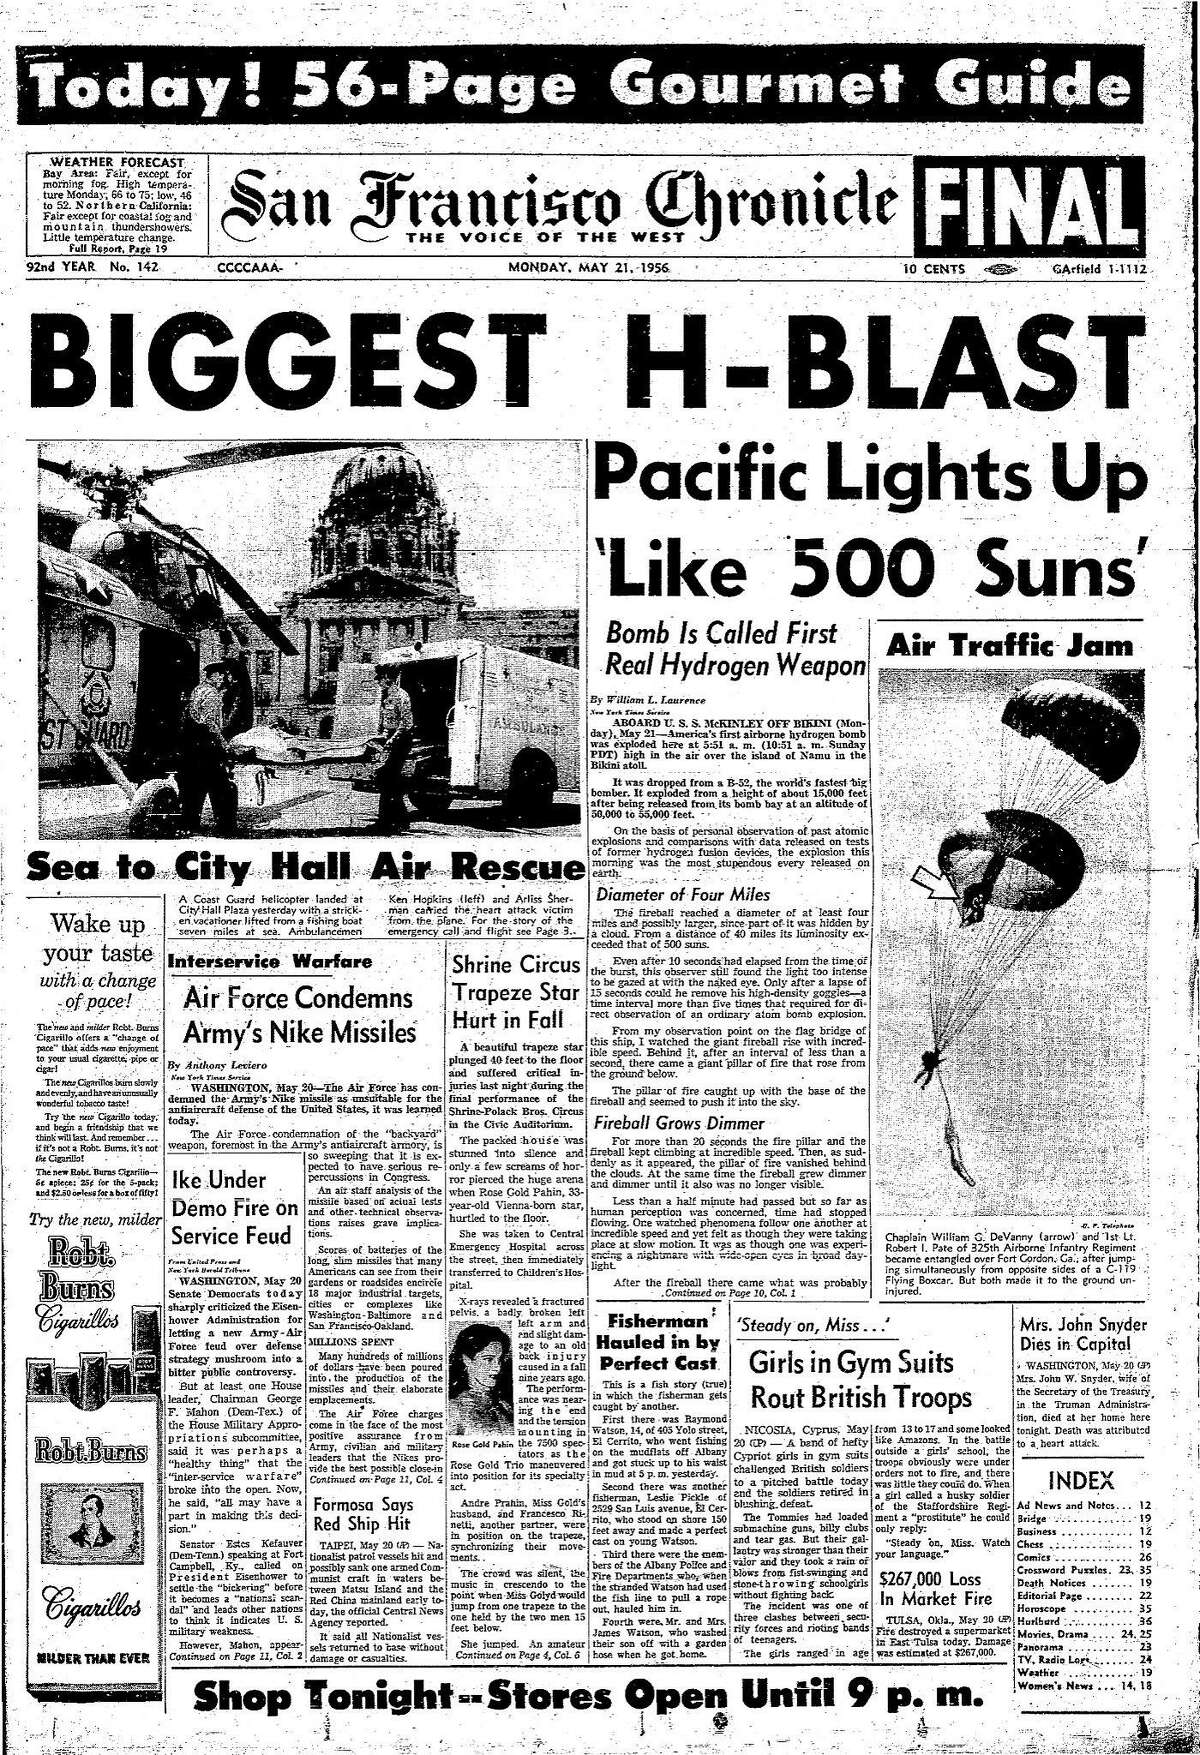 Historic Chronicle Front Page May 21, 1956 Atomic Bomb test .. Hydrogen bomb lights up the sky Chron365, Chroncover